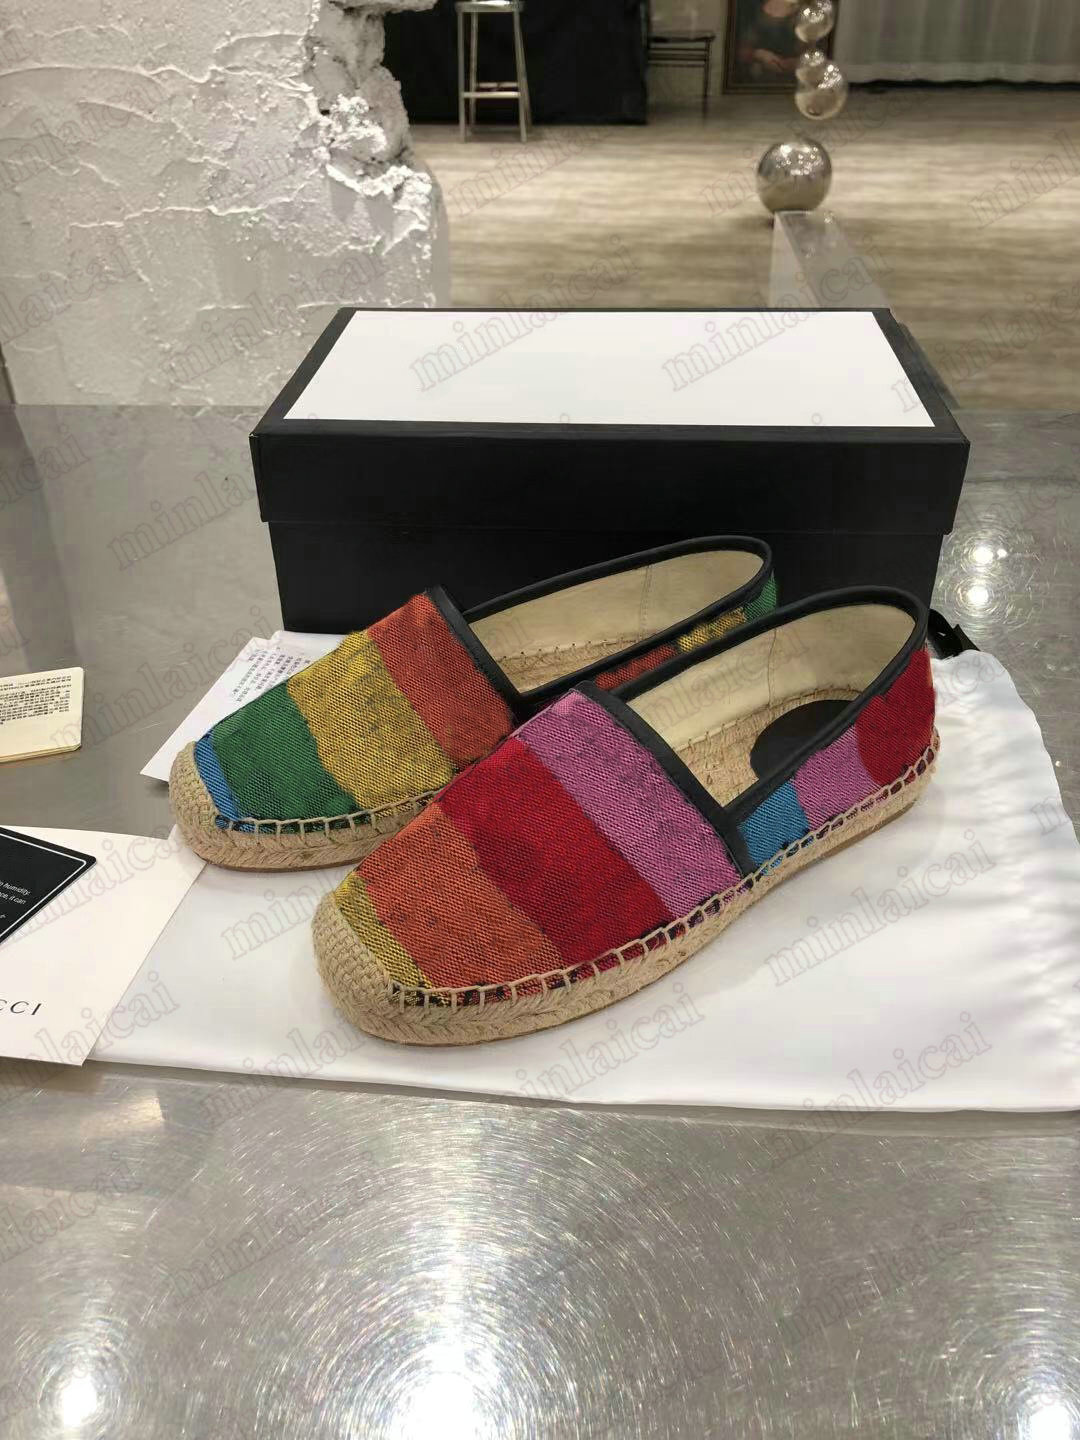 

2021SS Multicolor Espadrille Printed Loafer Shoes Womens Capsule Canvas Flats Sneakers Italy Luxurys Designers Trainer Runner Casual Loafers Shoe Rubber sole, Customize